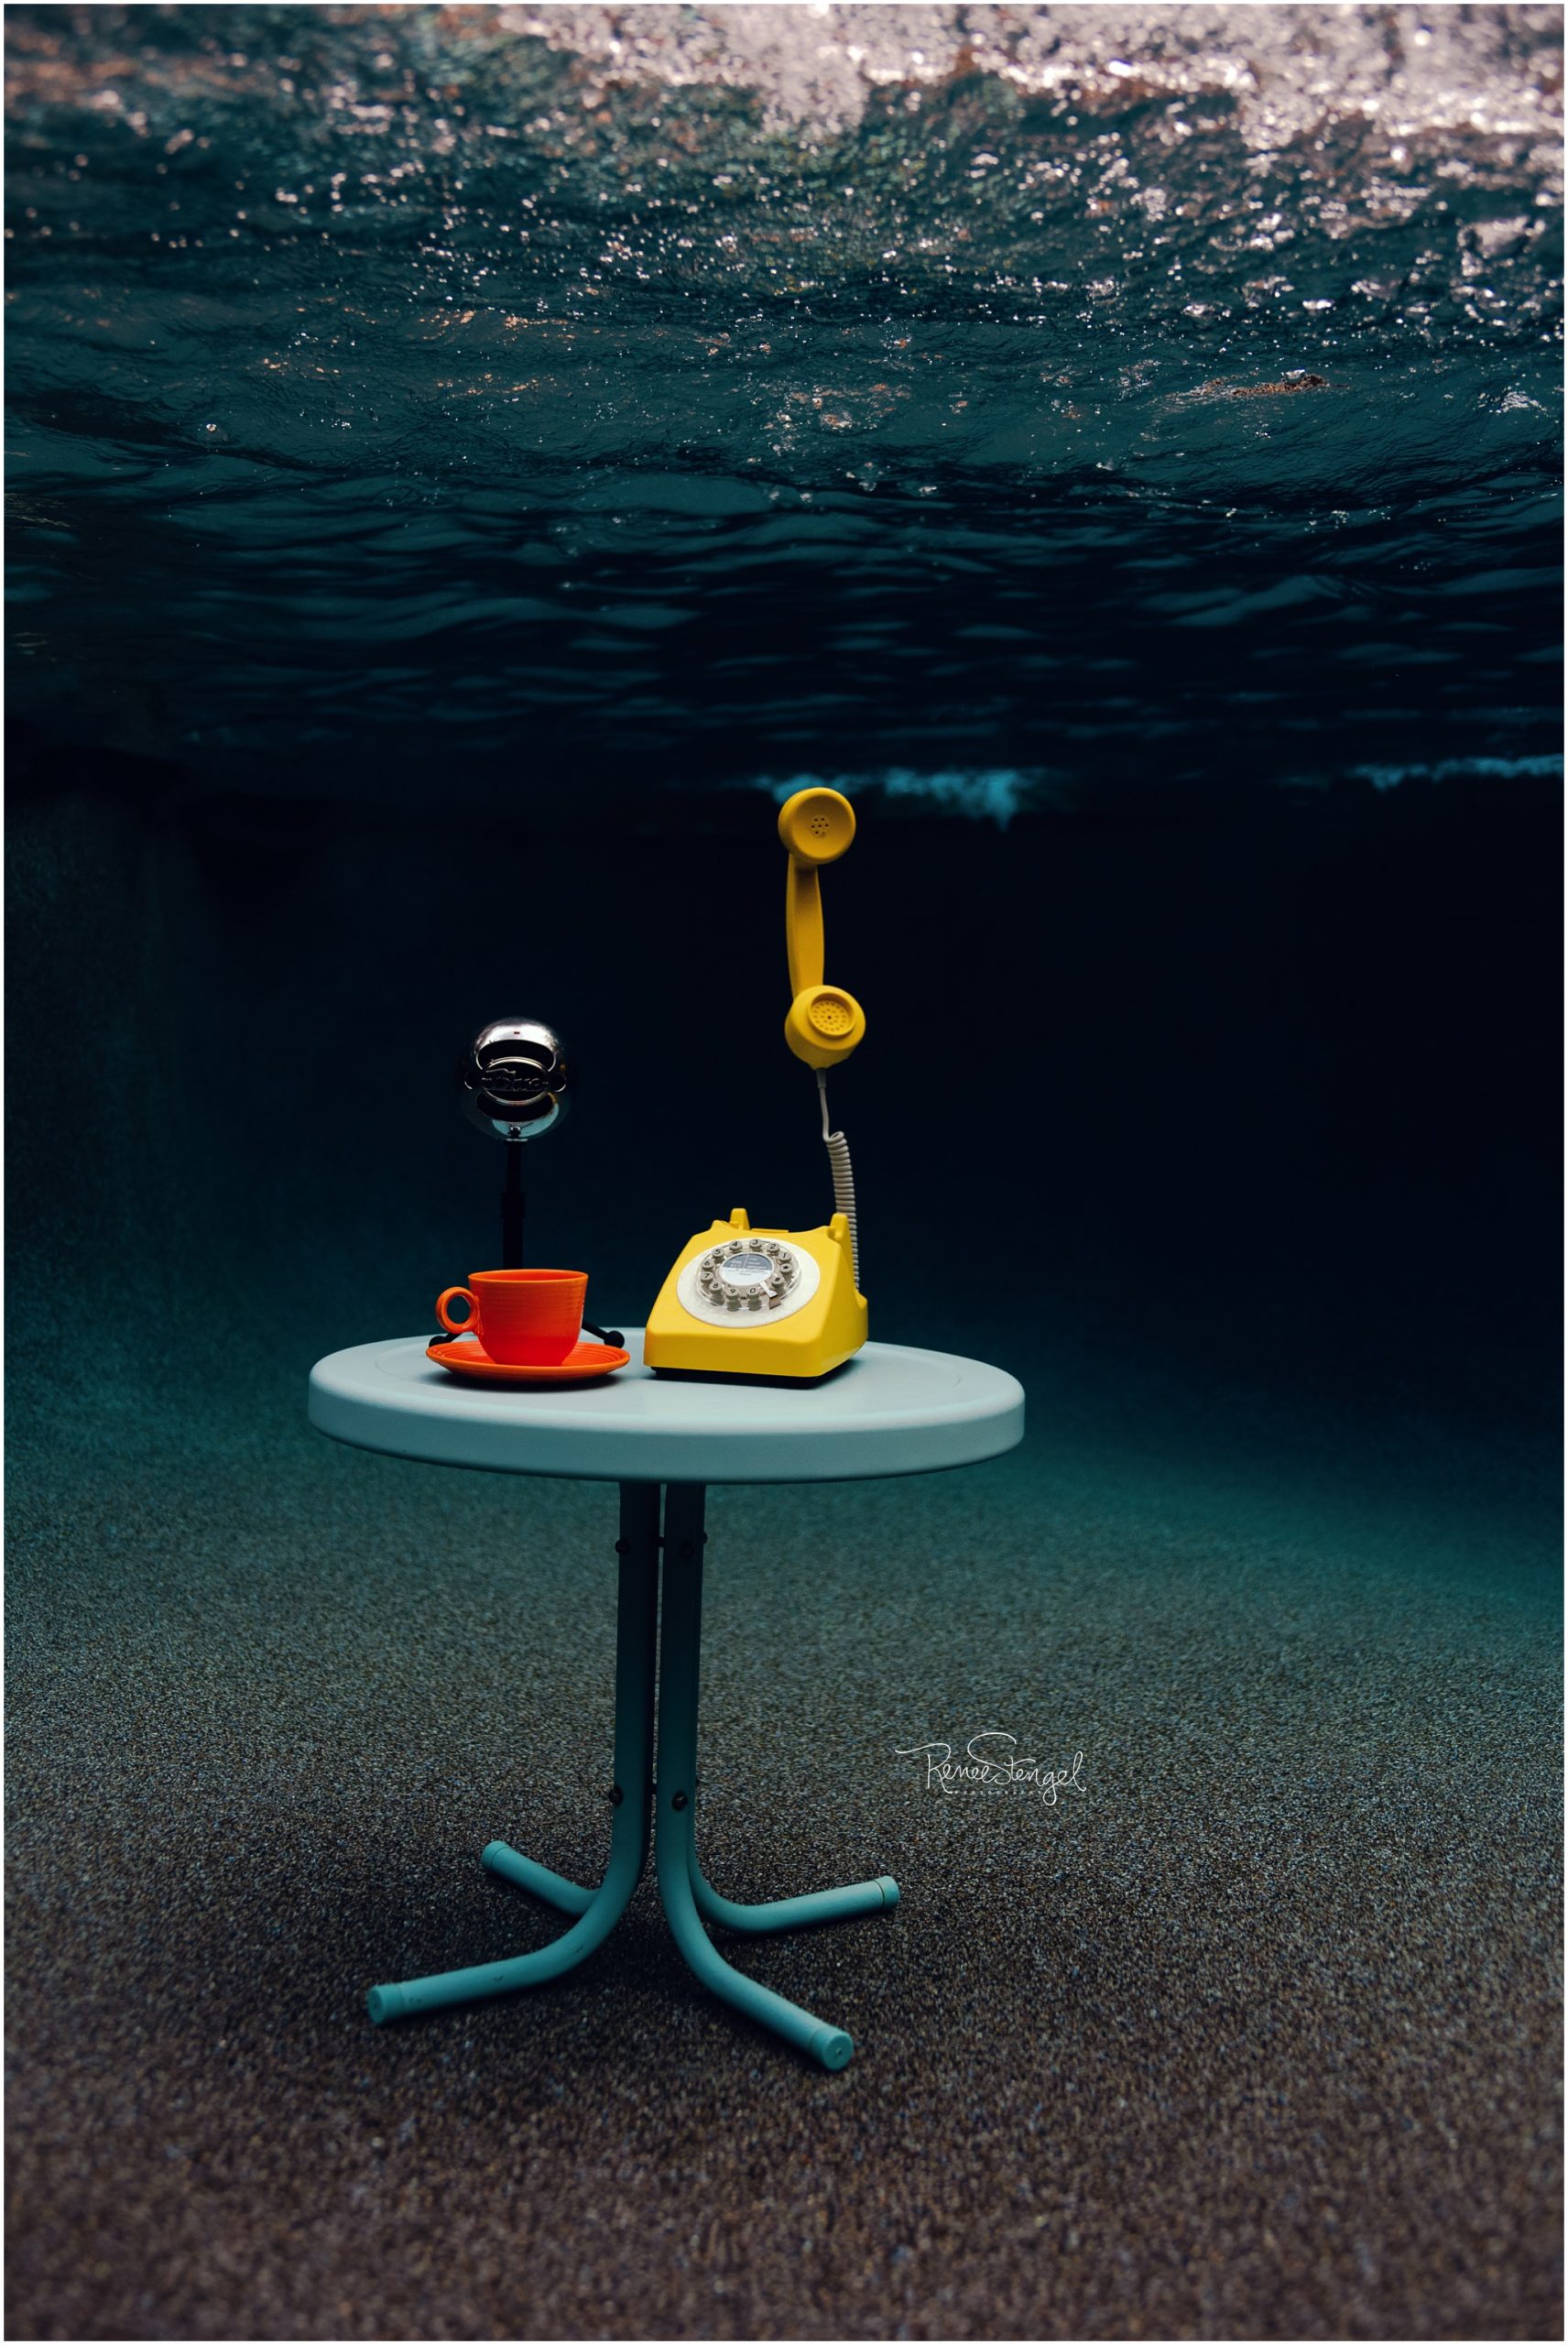 Choosing a Niche in Underwater Photography Podcast with Crafted to Thrive | Blue Snowball Podcast Mics, Yellow Vintage Phone and Orange Fiestaware Teacup Underwater on Tiffany Blue Table